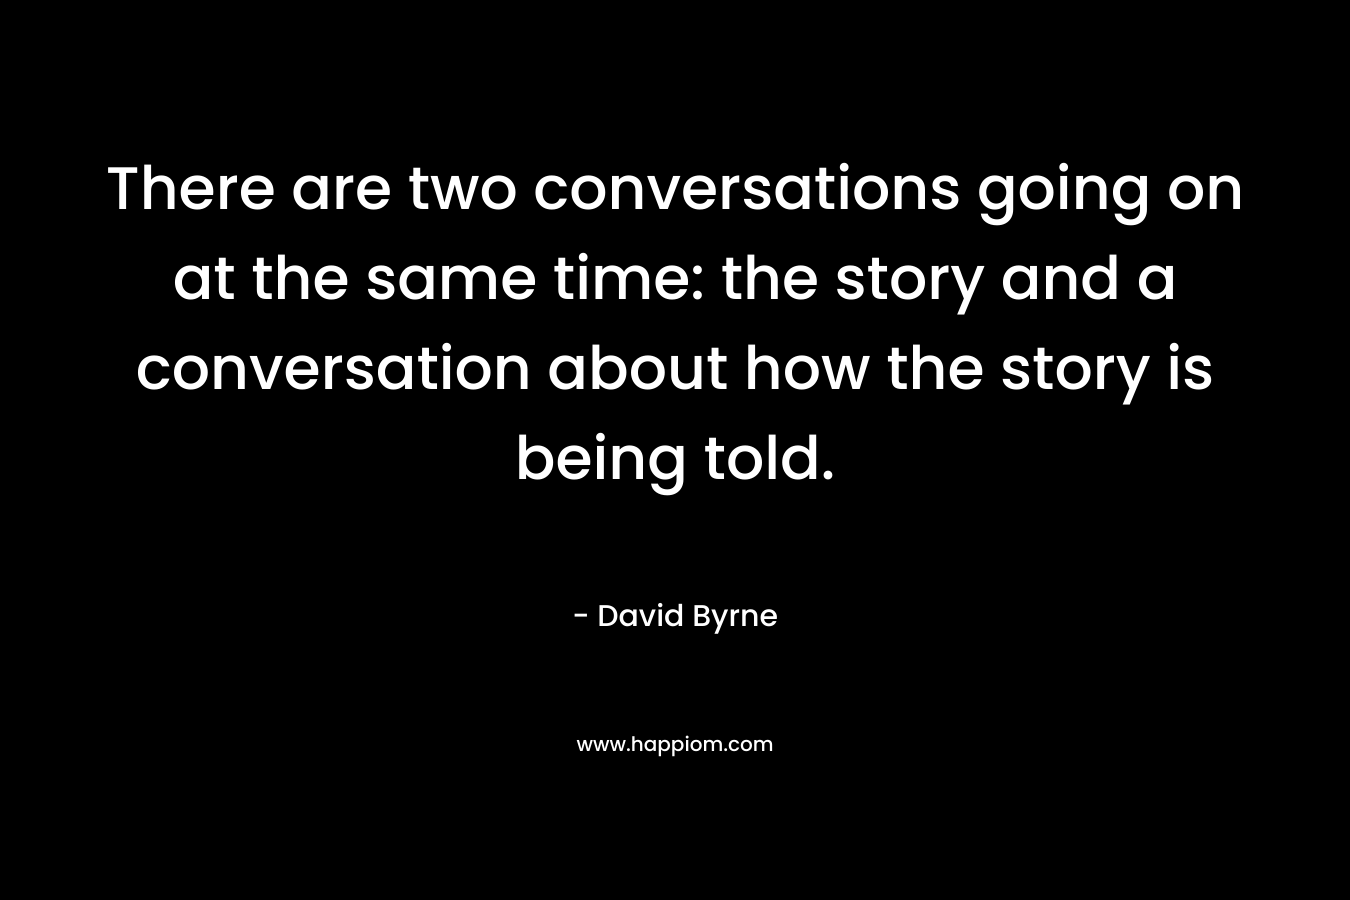 There are two conversations going on at the same time: the story and a conversation about how the story is being told. – David Byrne